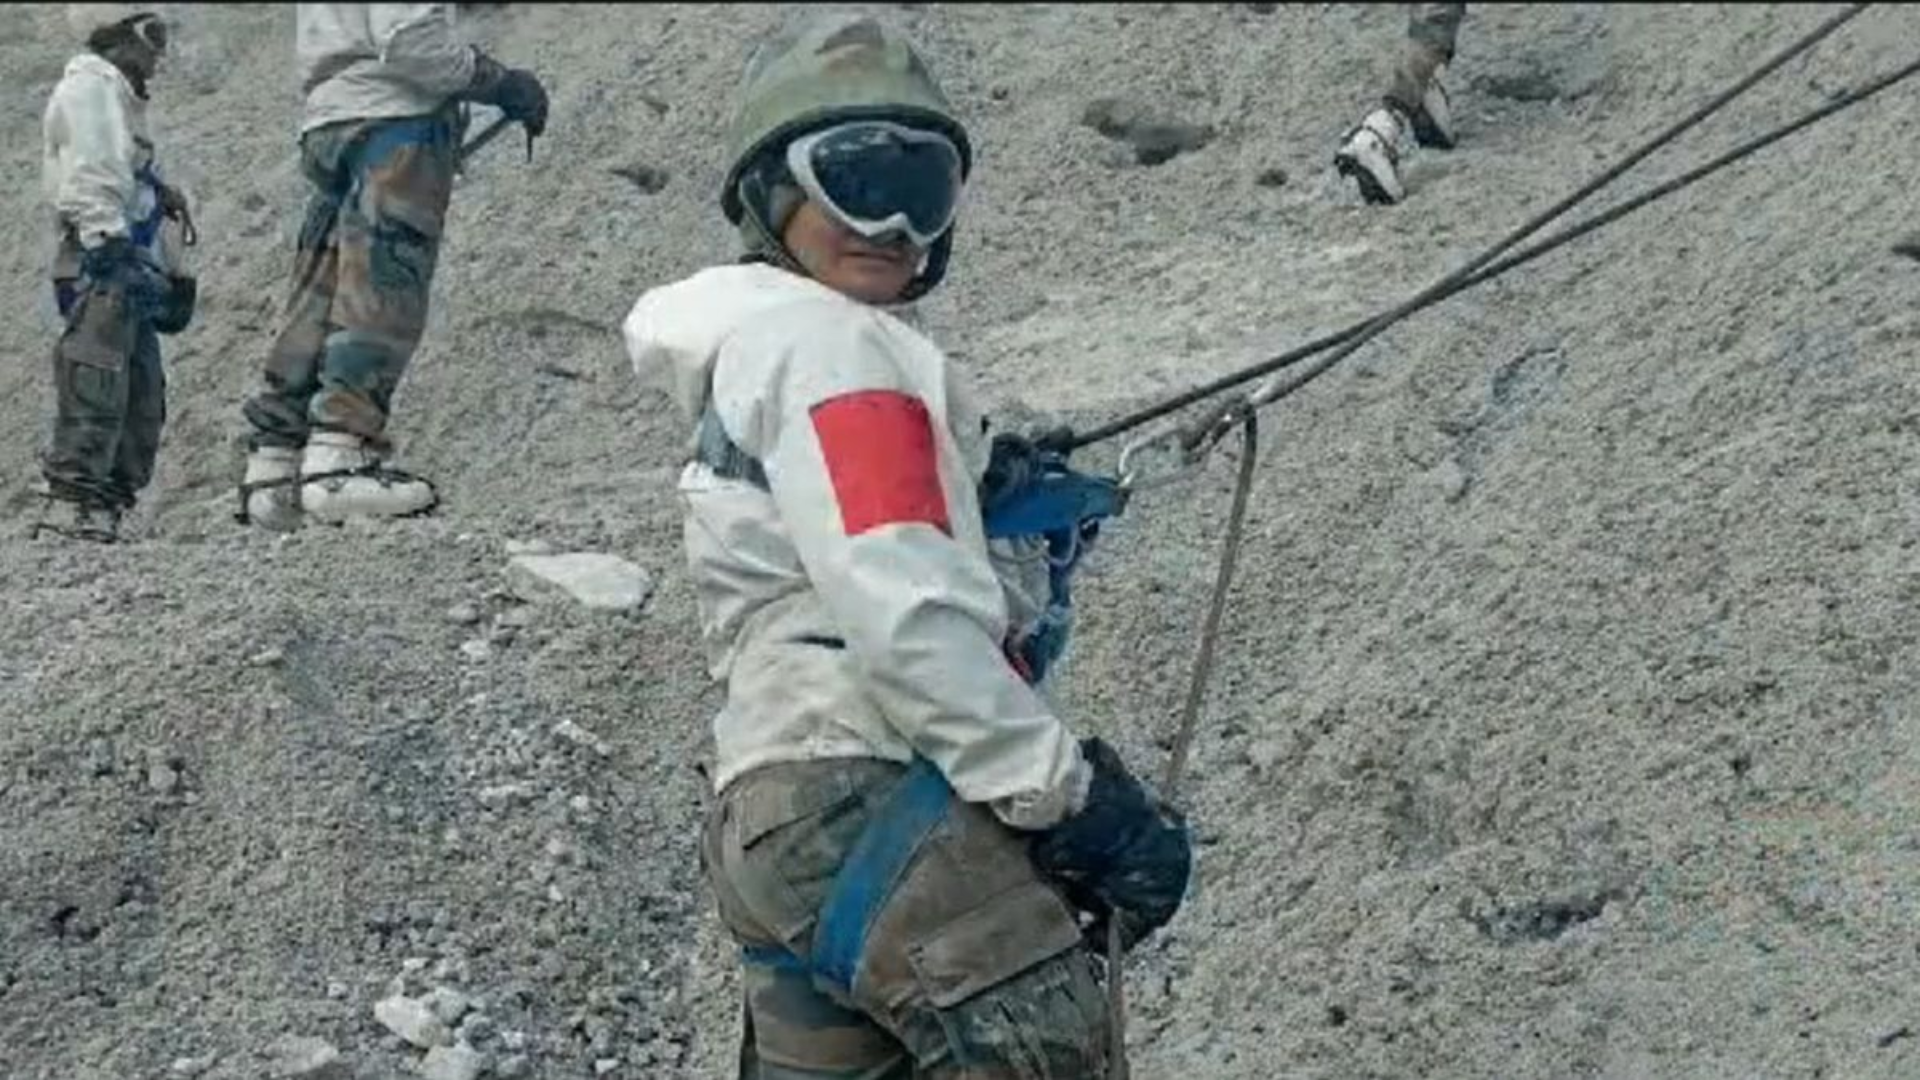 Captain Fatima Wasim Makes History as First Woman Medical Officer Deployed to Siachen Glacier